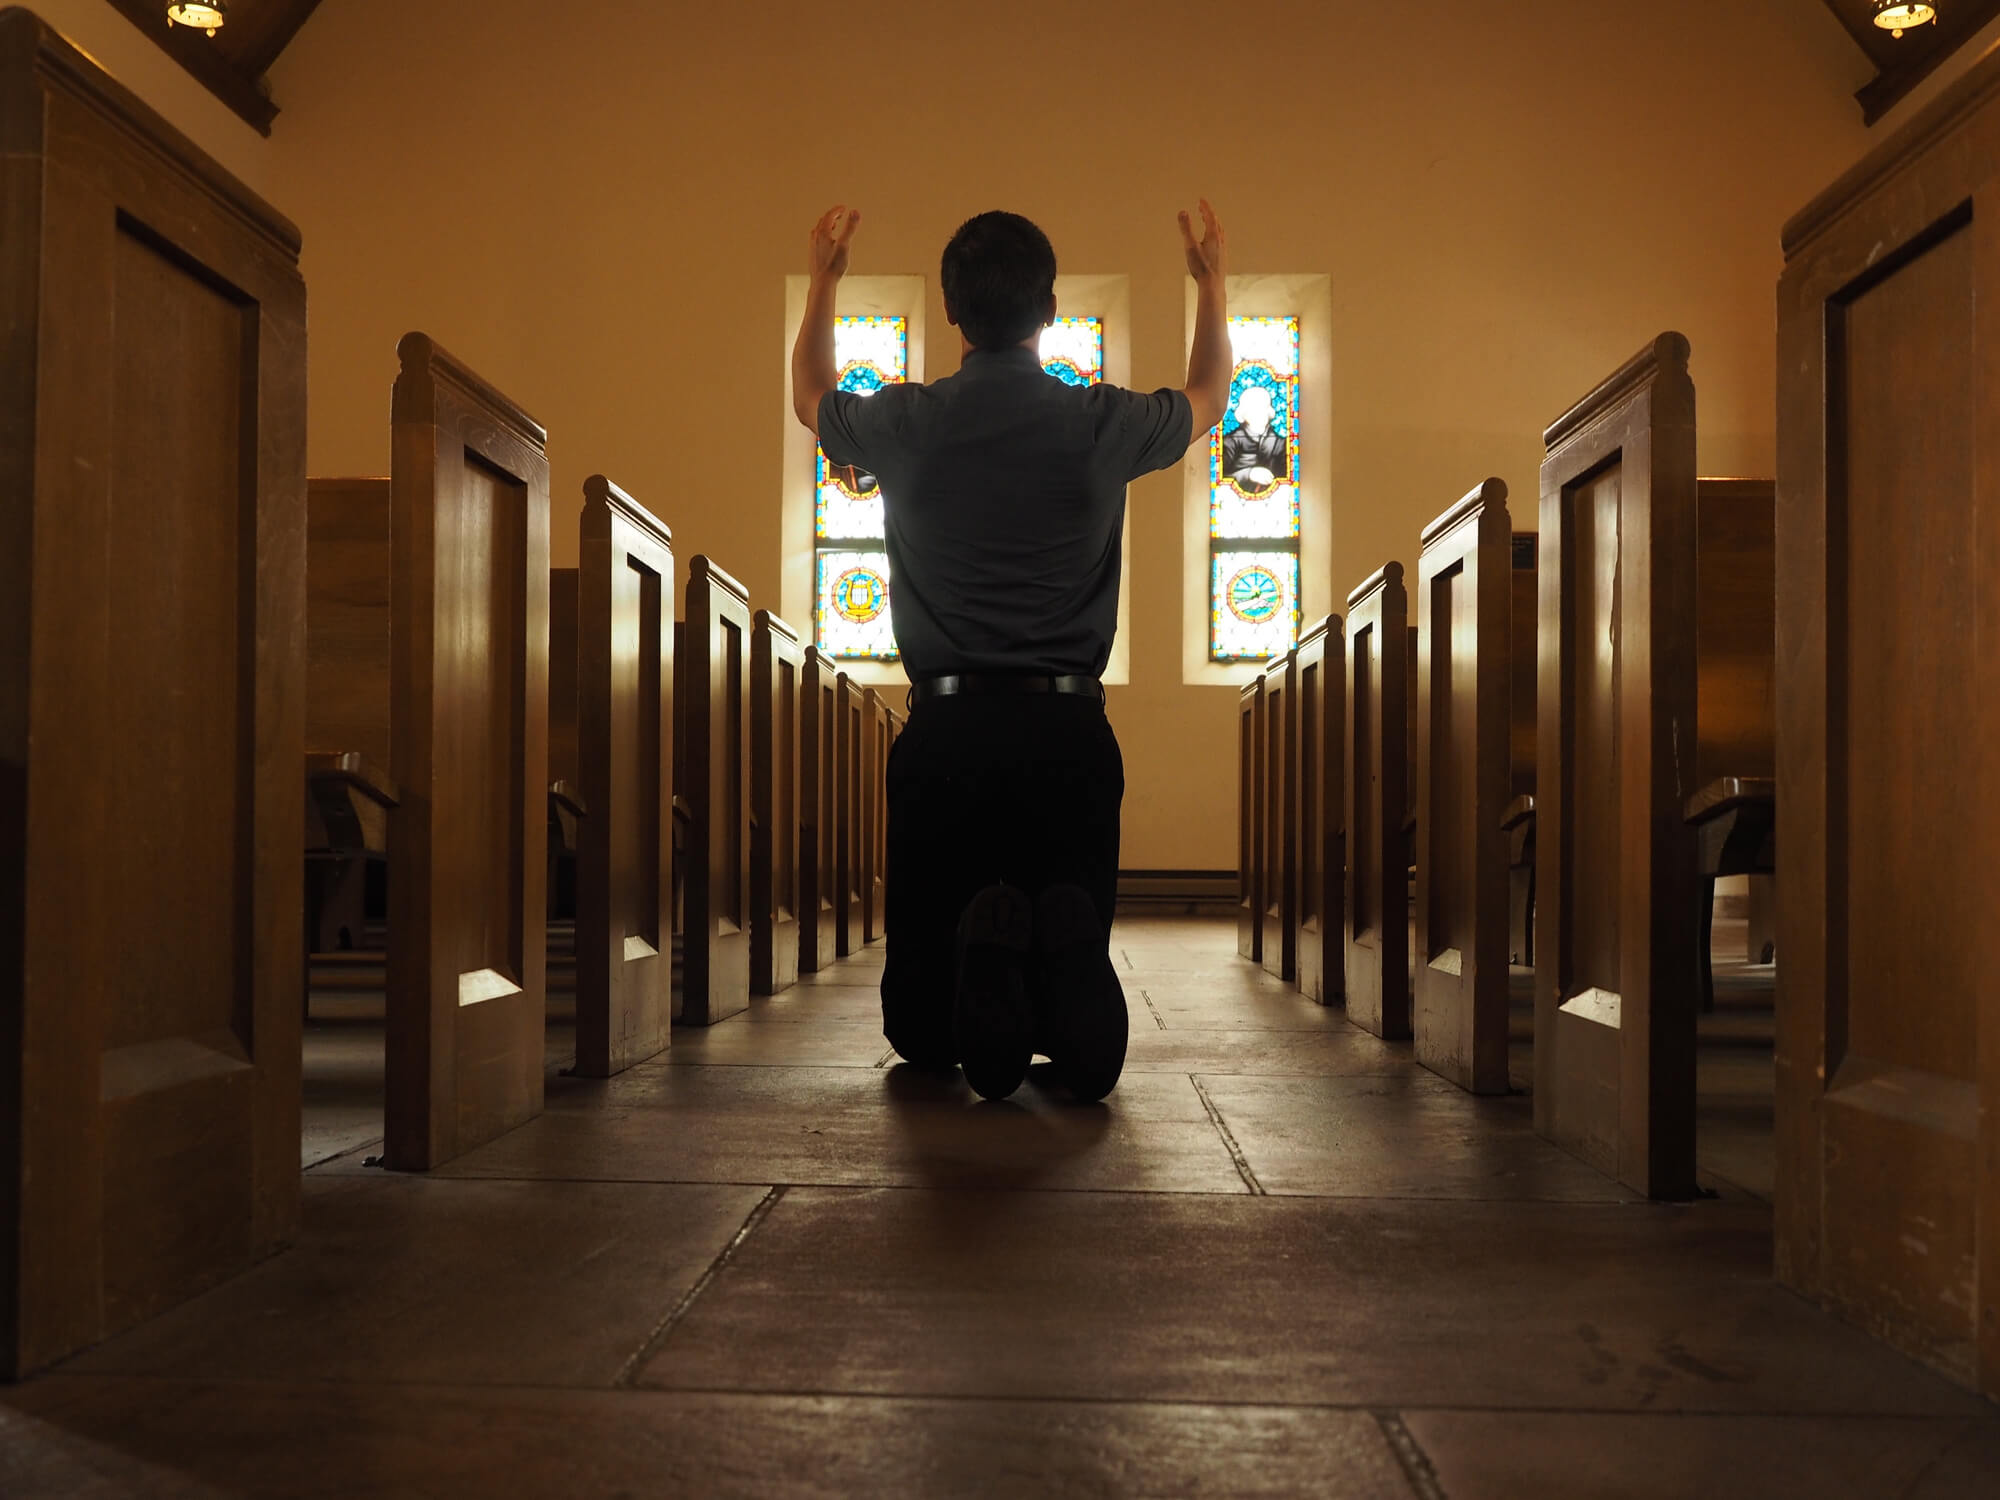 A man praying for his church in an empty sanctuary.